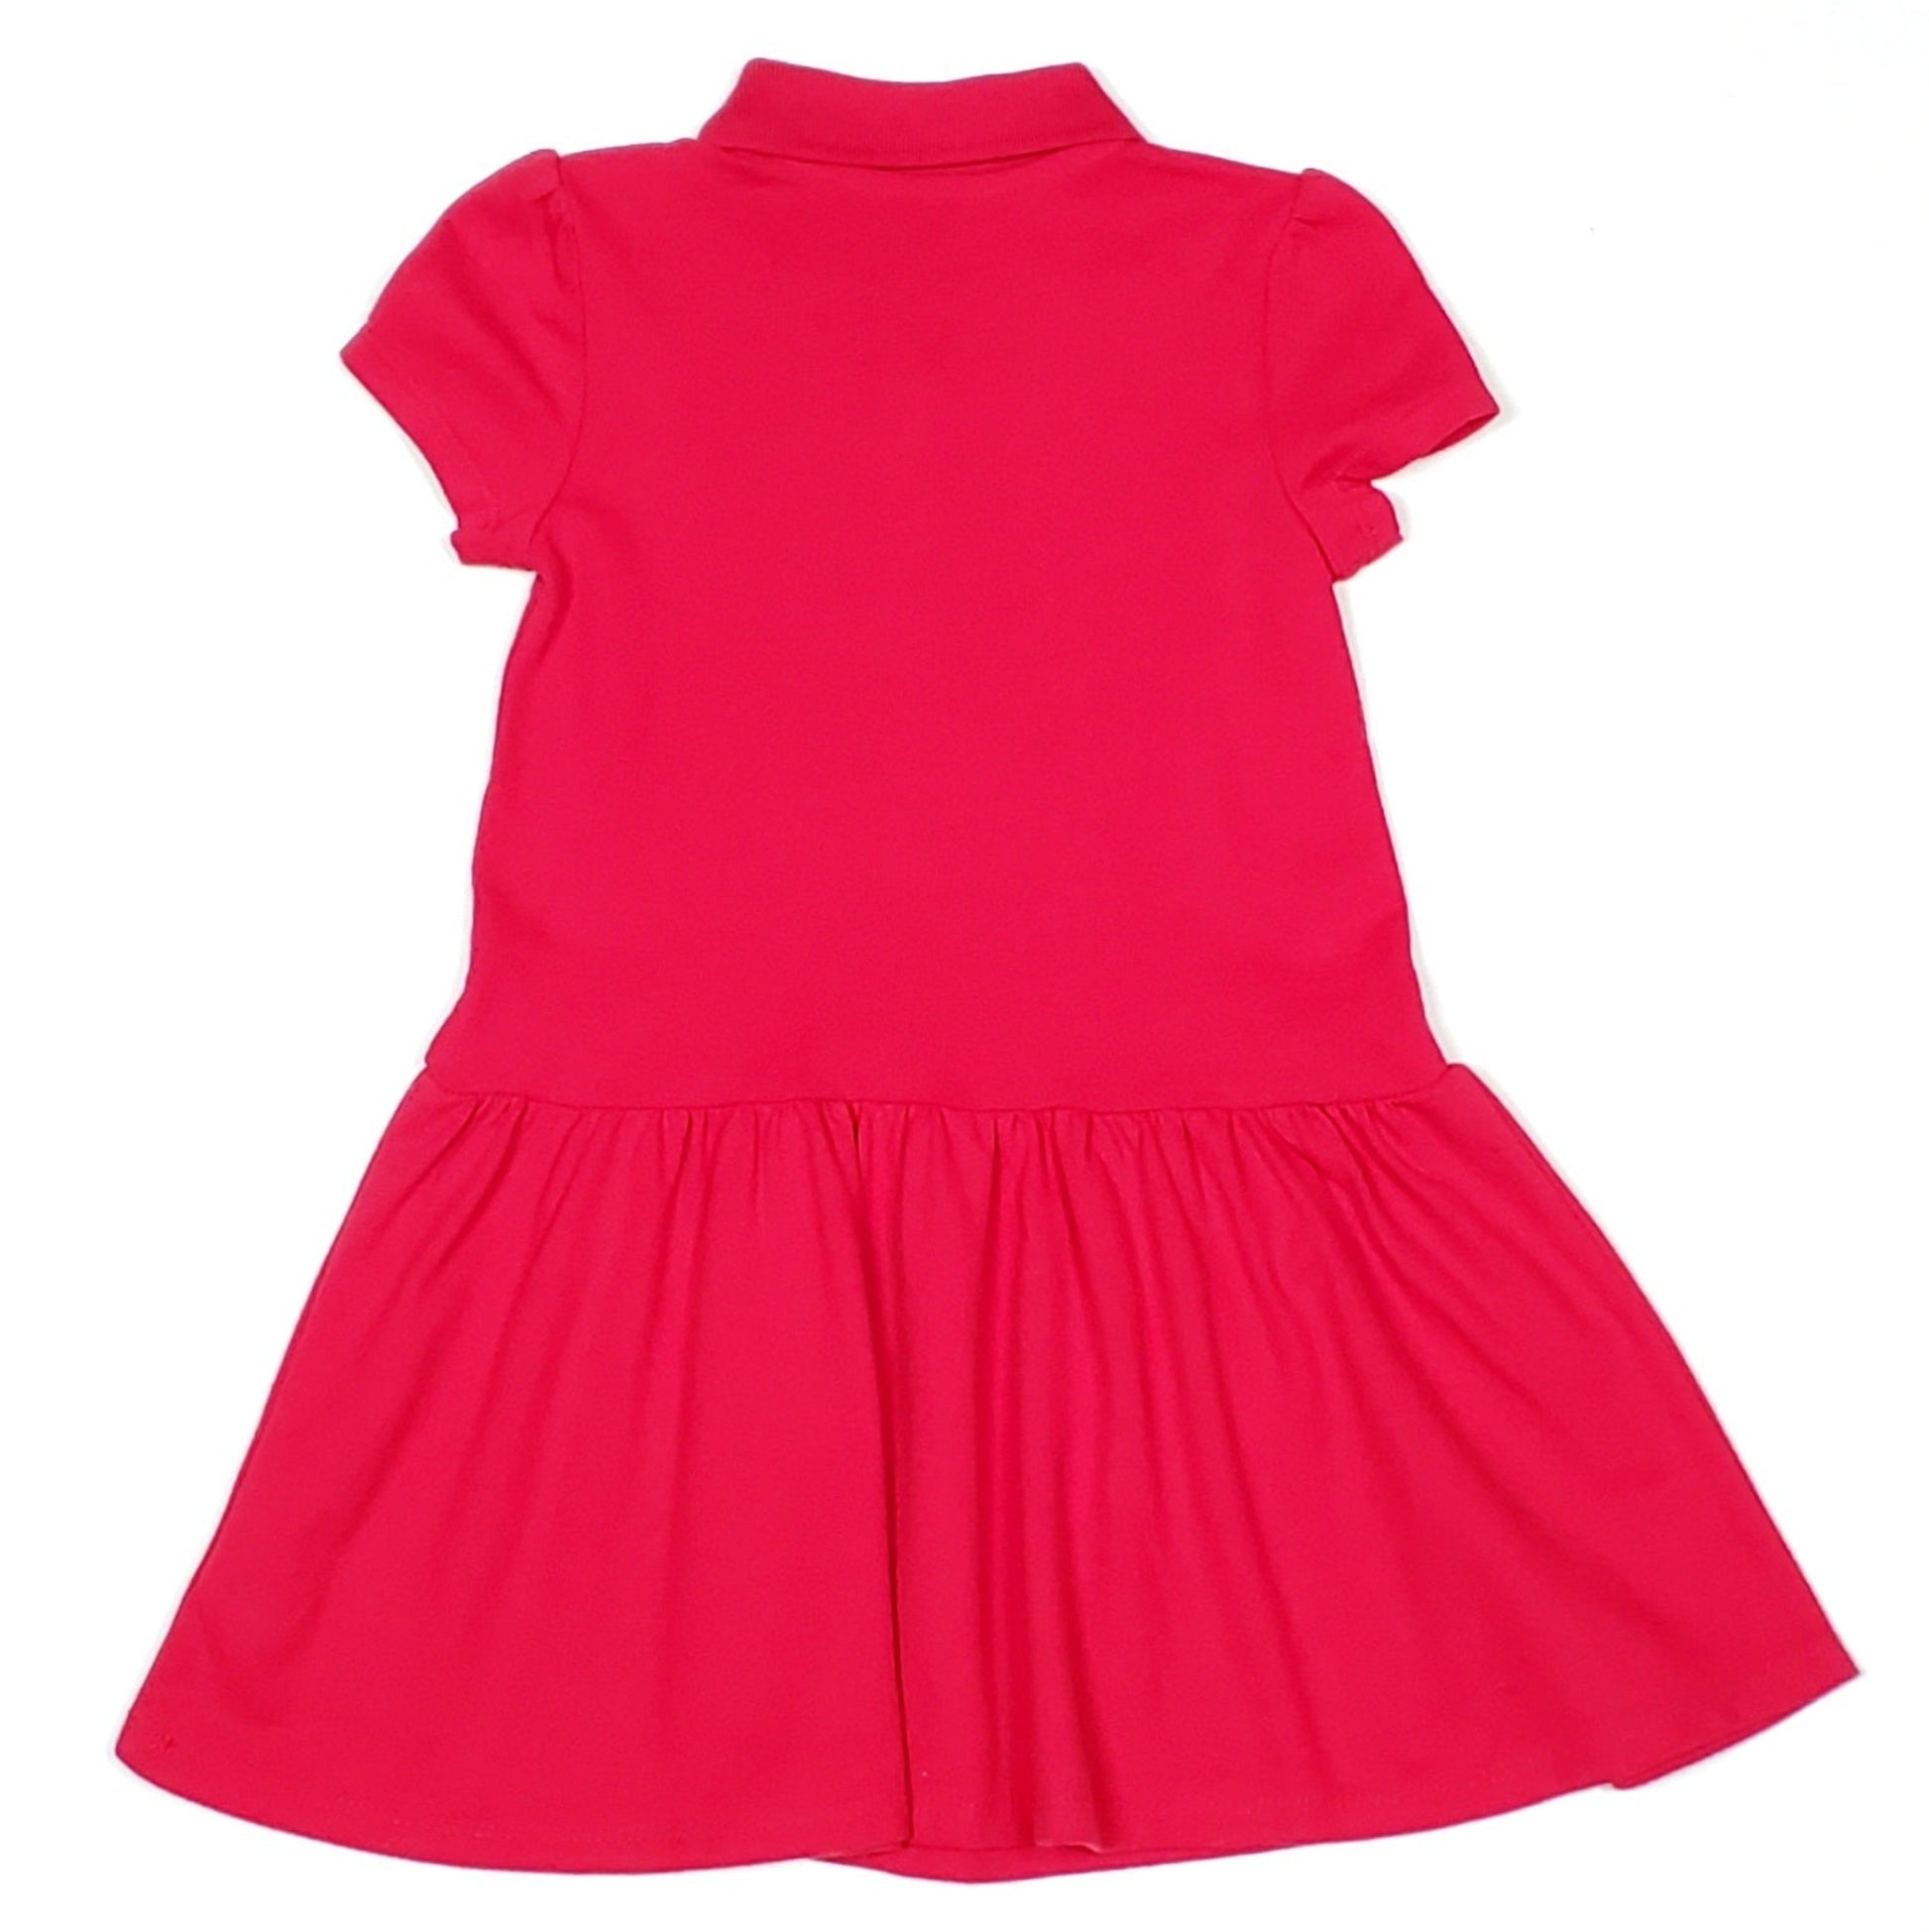 Childrens Place Girls Red Polo Dress 3T NWT View 2